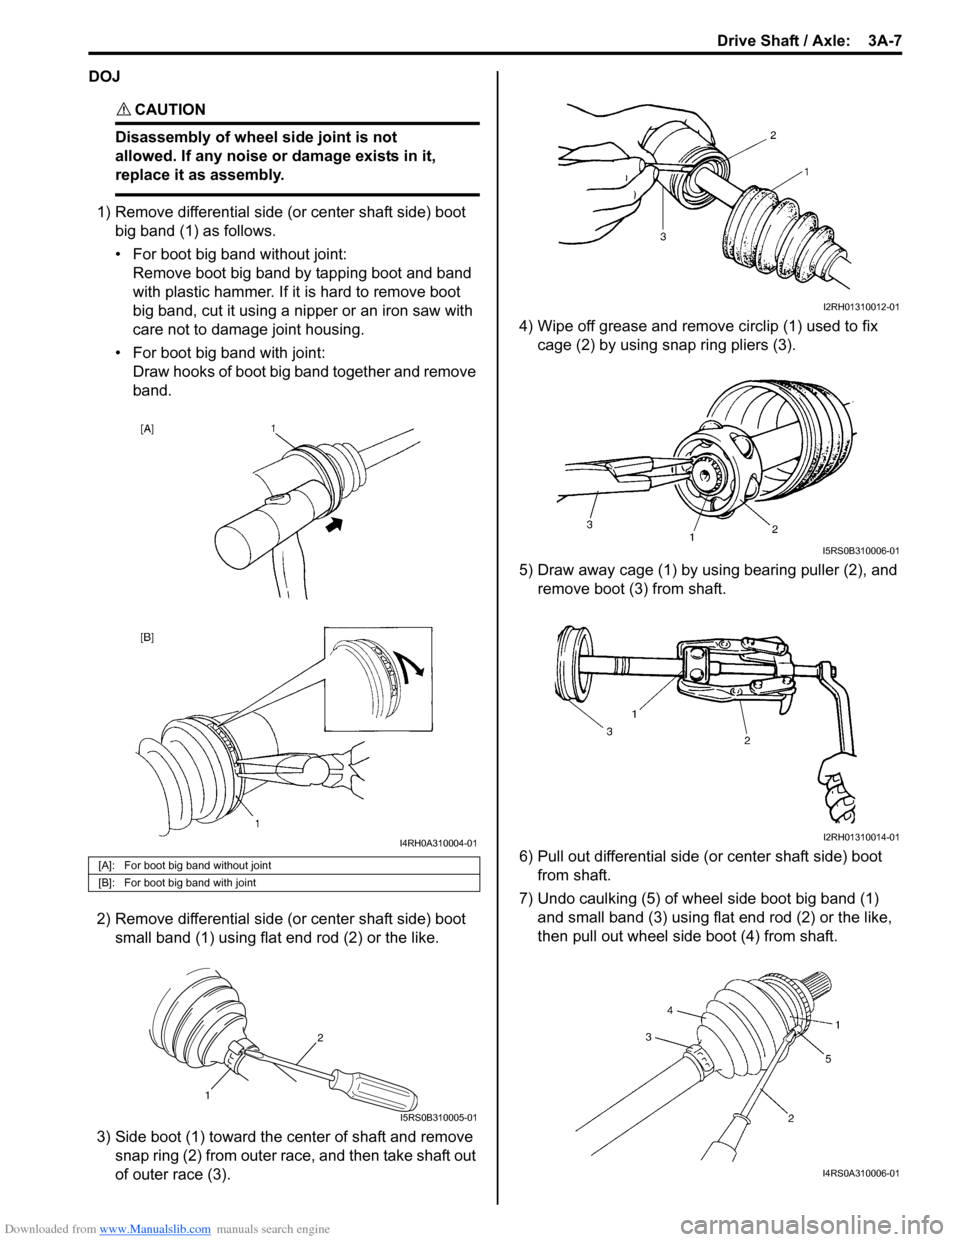 SUZUKI SWIFT 2007 2.G Service Workshop Manual Downloaded from www.Manualslib.com manuals search engine Drive Shaft / Axle:  3A-7
DOJ
CAUTION! 
Disassembly of wheel side joint is not 
allowed. If any noise or damage exists in it, 
replace it as as